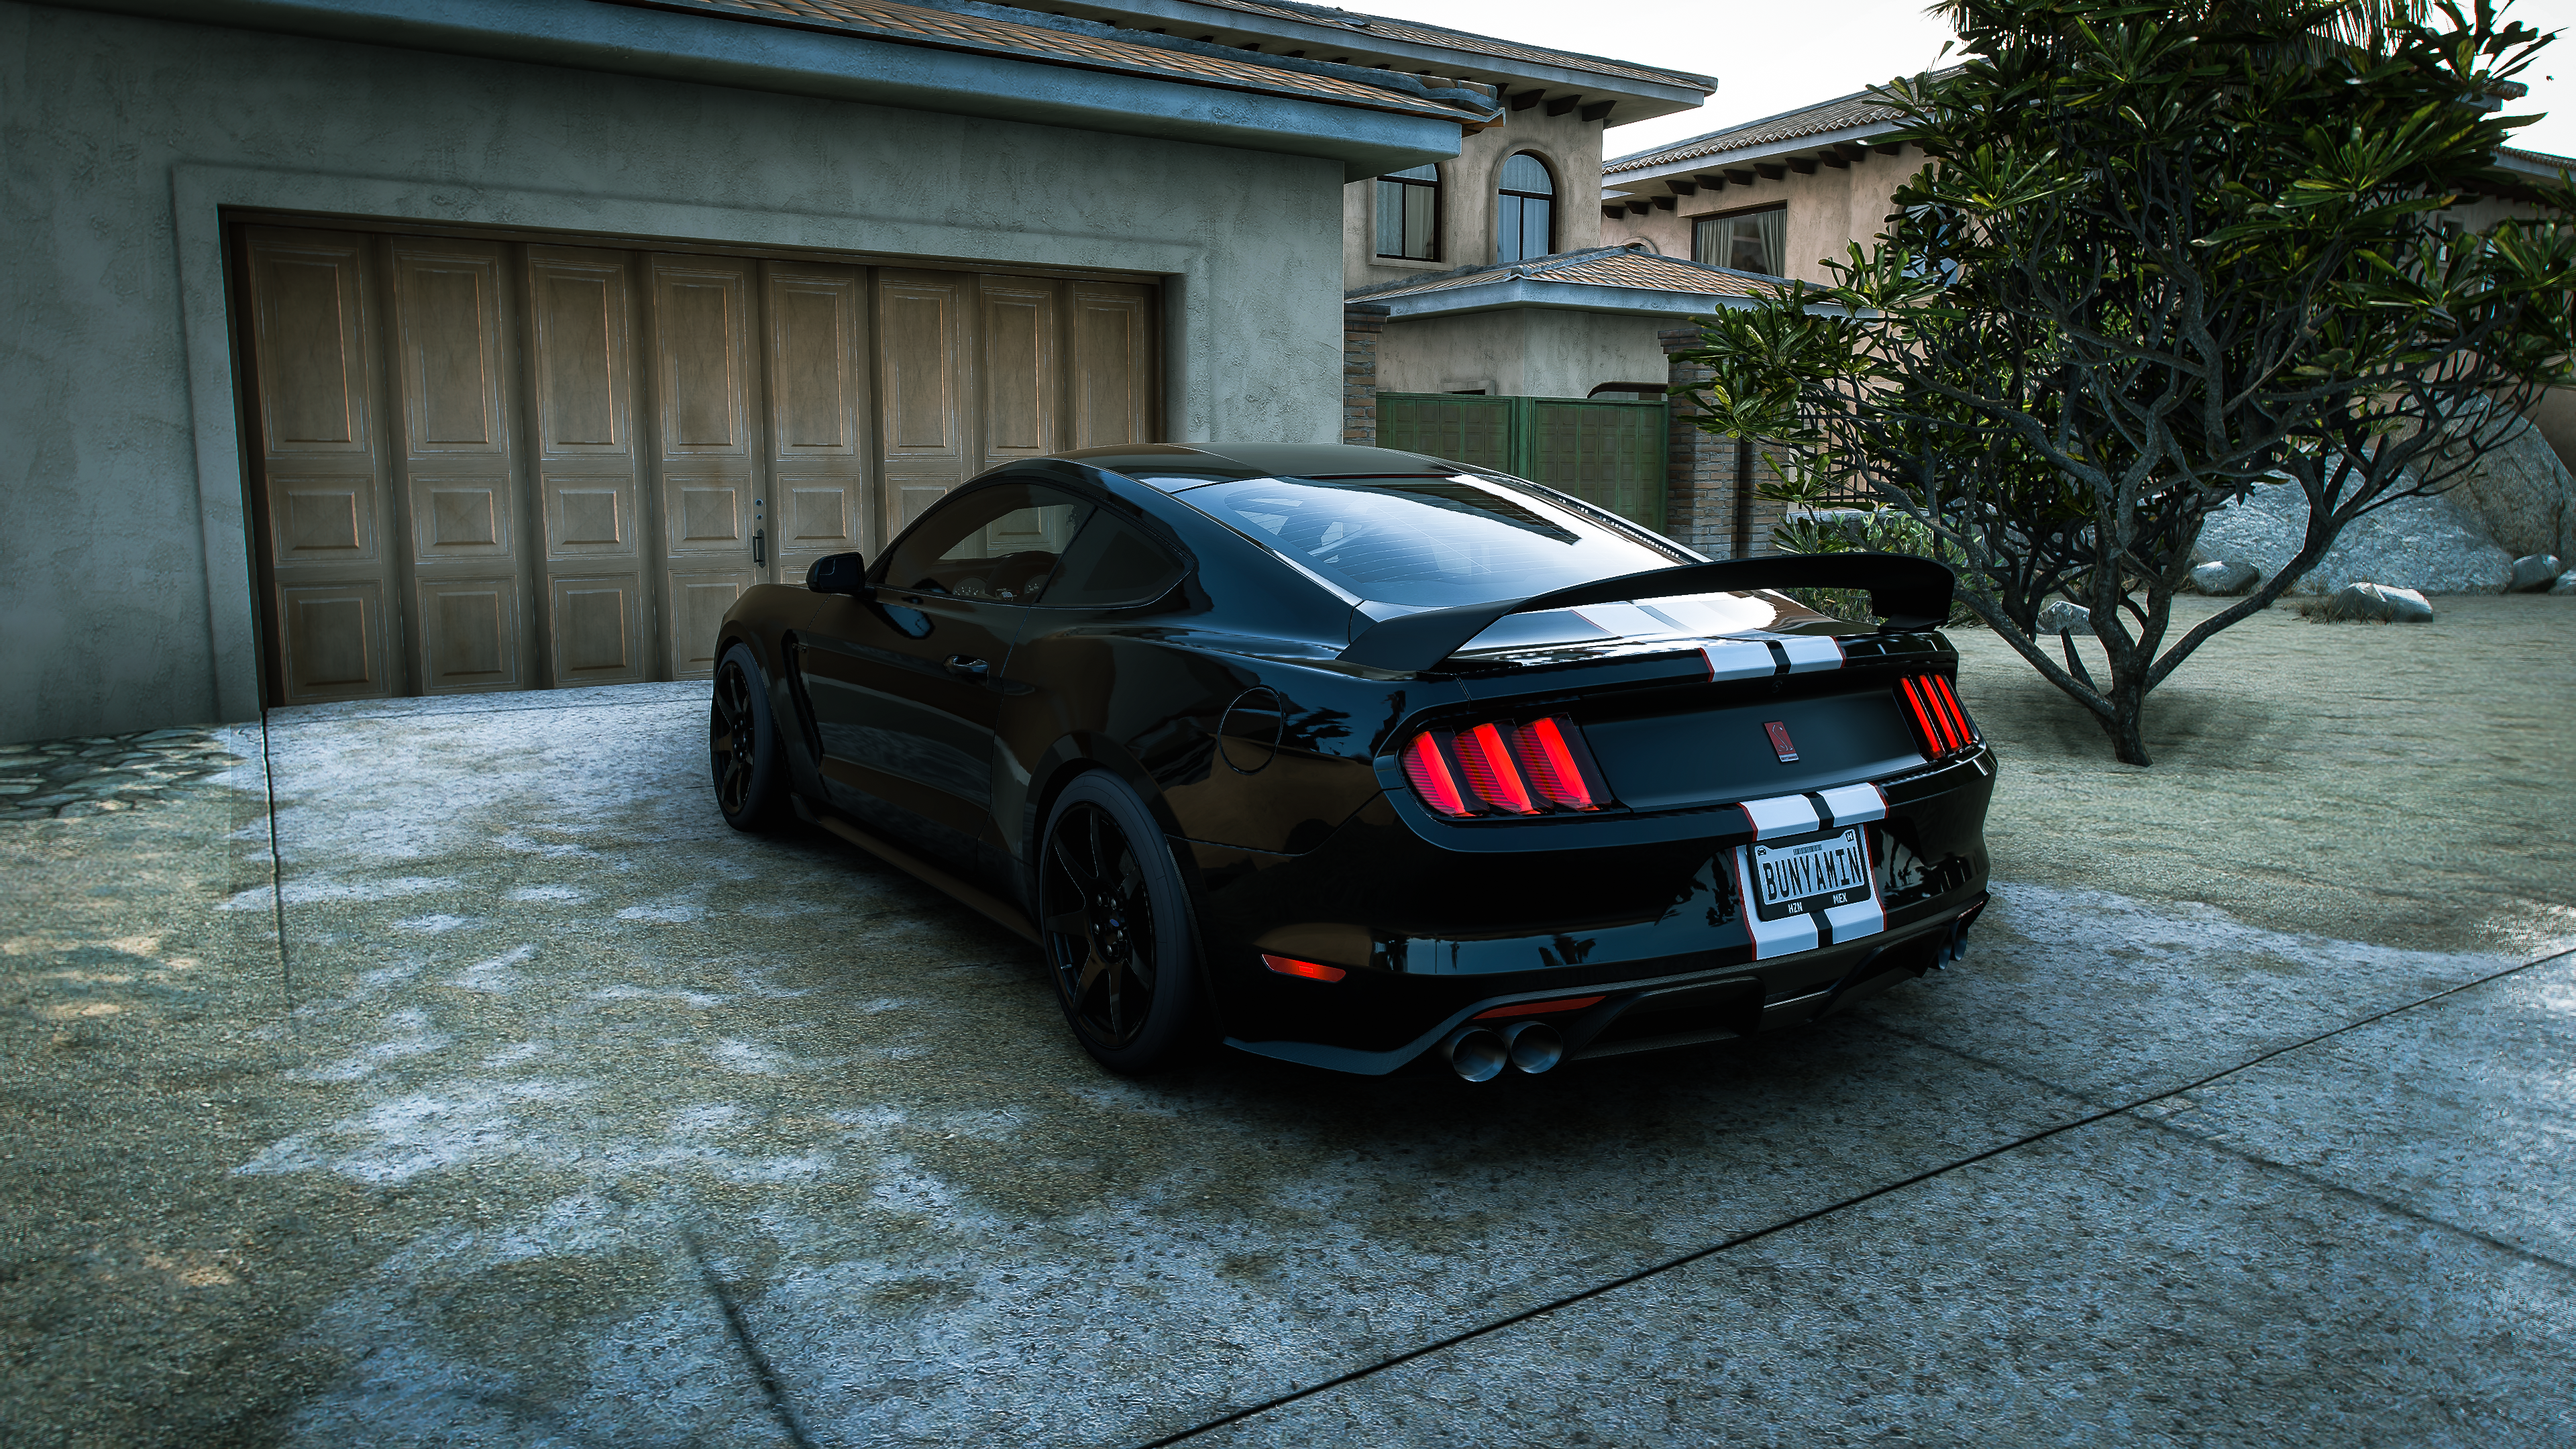 Forza Horizon 5 Forza Horizon Forza Ford Shelby Race Cars Video Games Video Game Art Garage Mexican  3840x2160